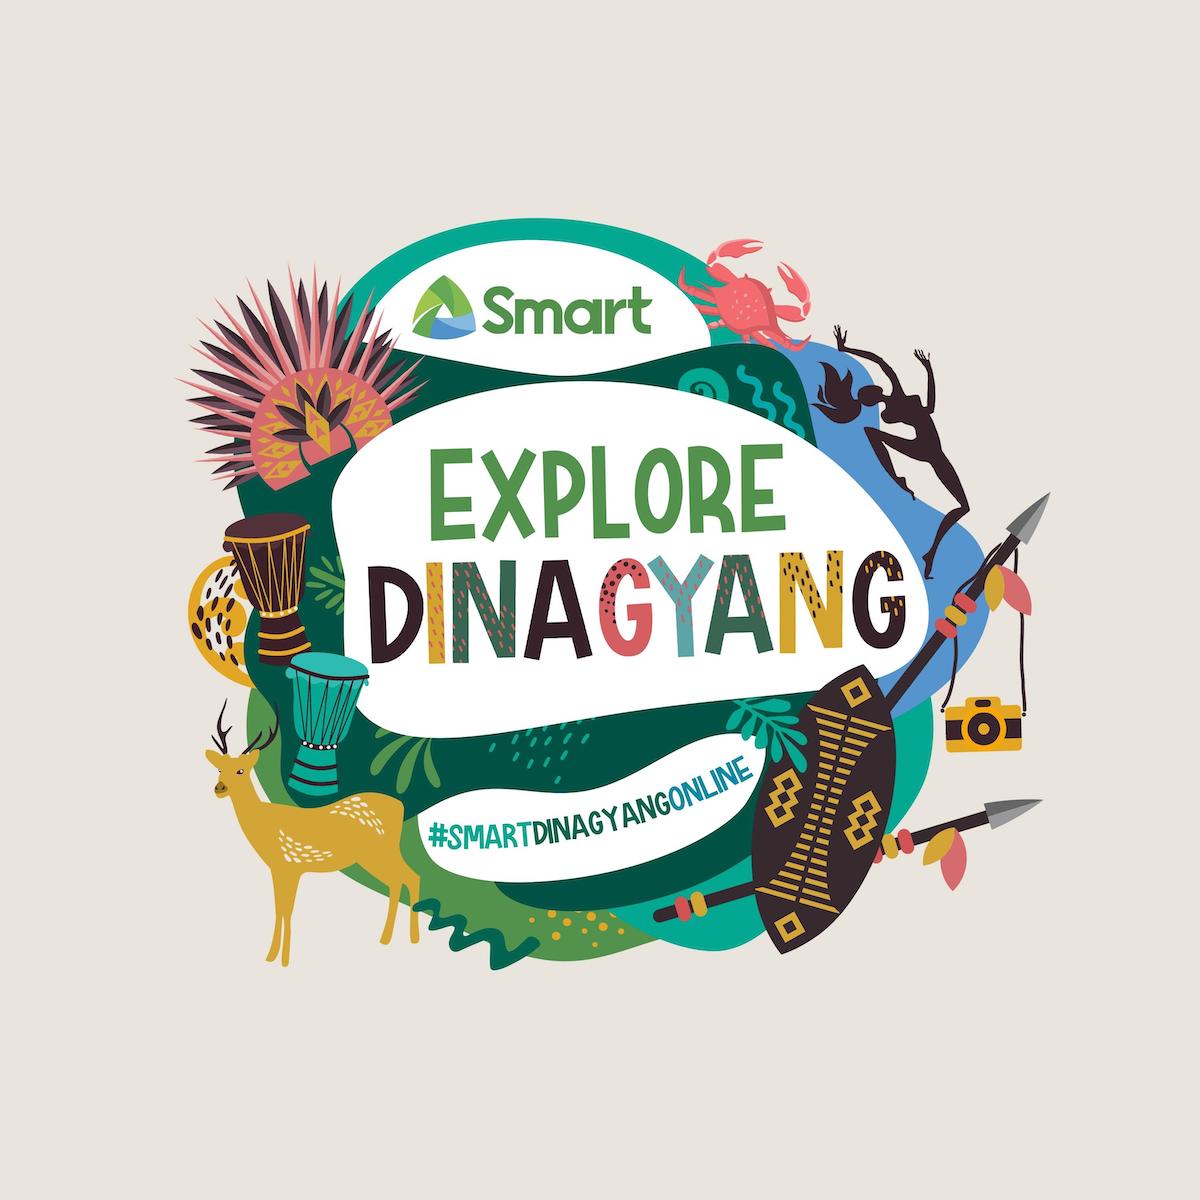 Smart powers First Digital 2021 Dinagyang Festival, supporting customer needs in pandemic